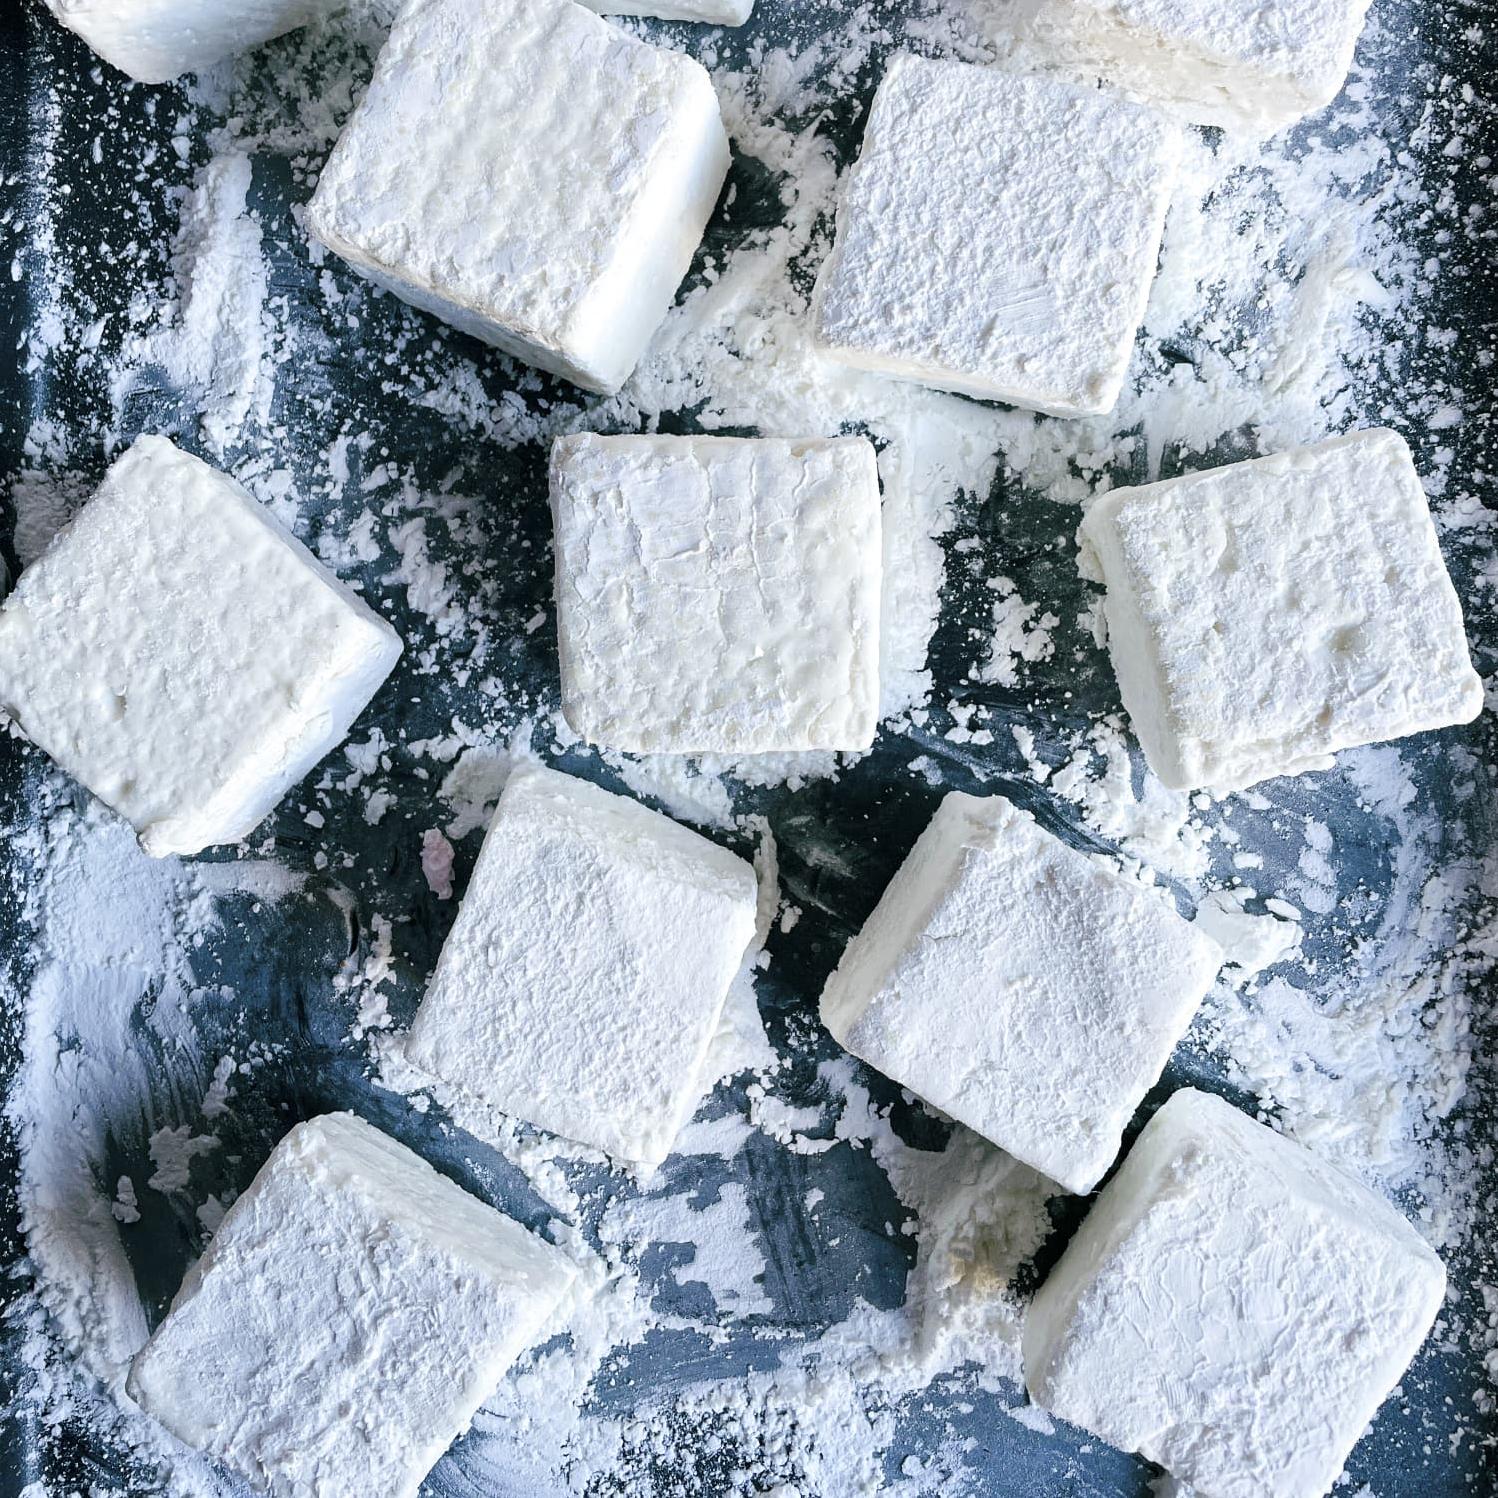  Say goodbye to store-bought marshmallows and hello to homemade vegan ones.